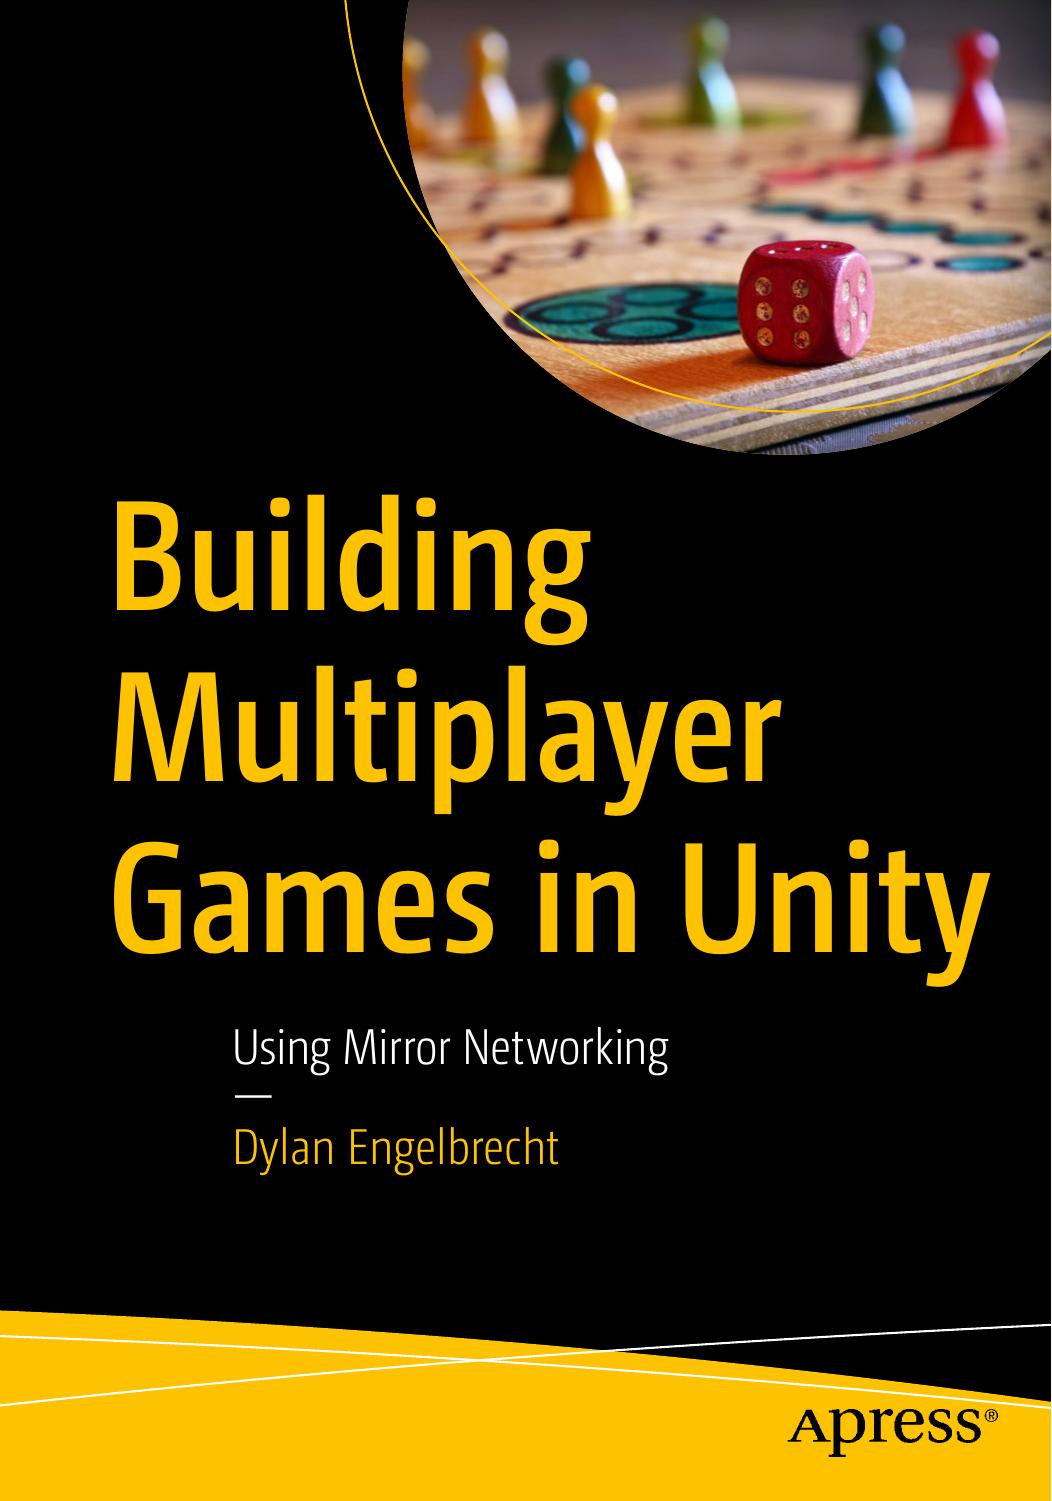 Building Multiplayer Games in Unity: using Mirror Networking